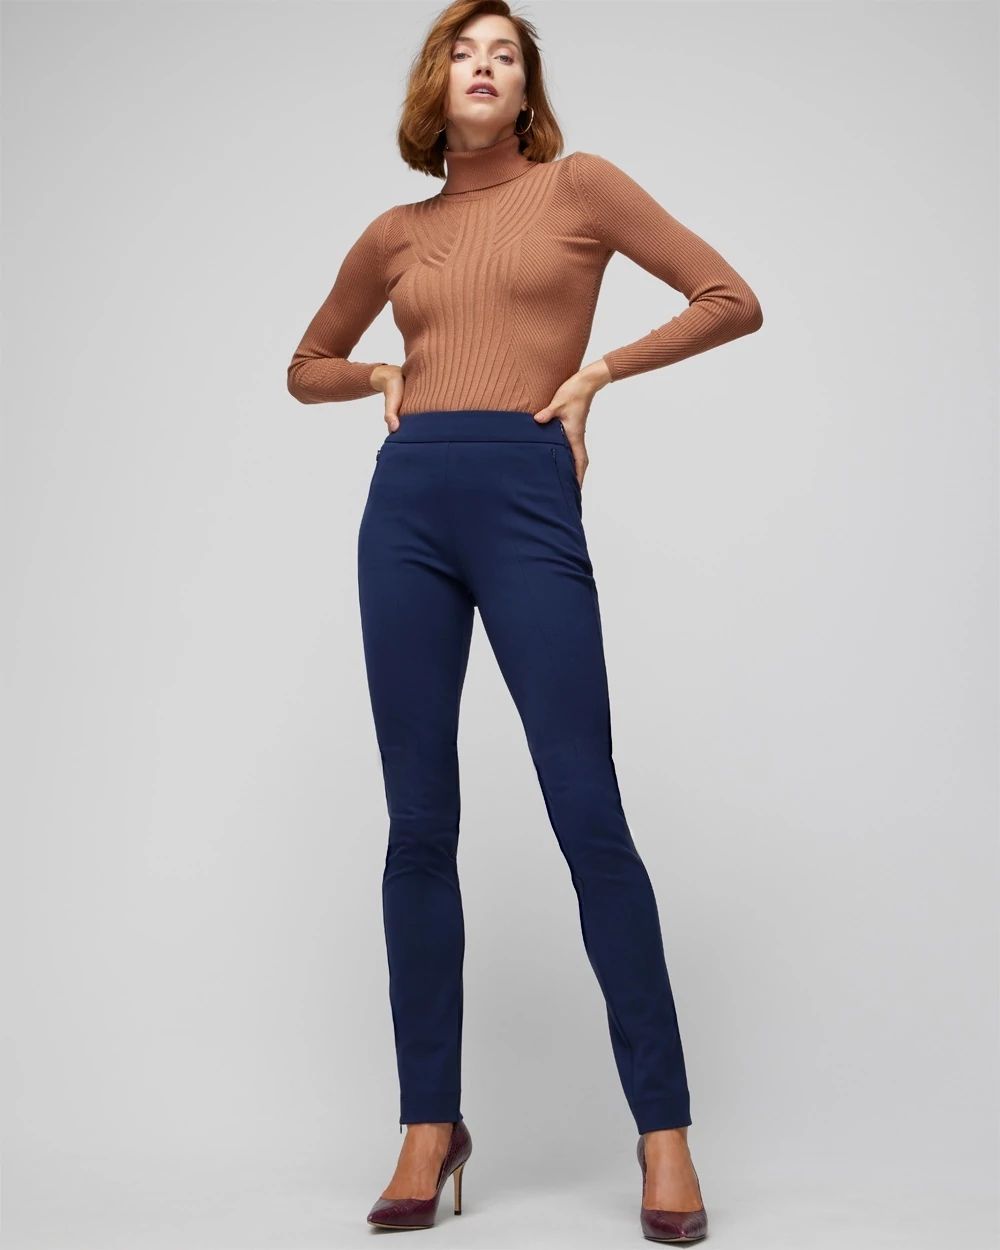 Petite Luxe Stretch Skinny Pant